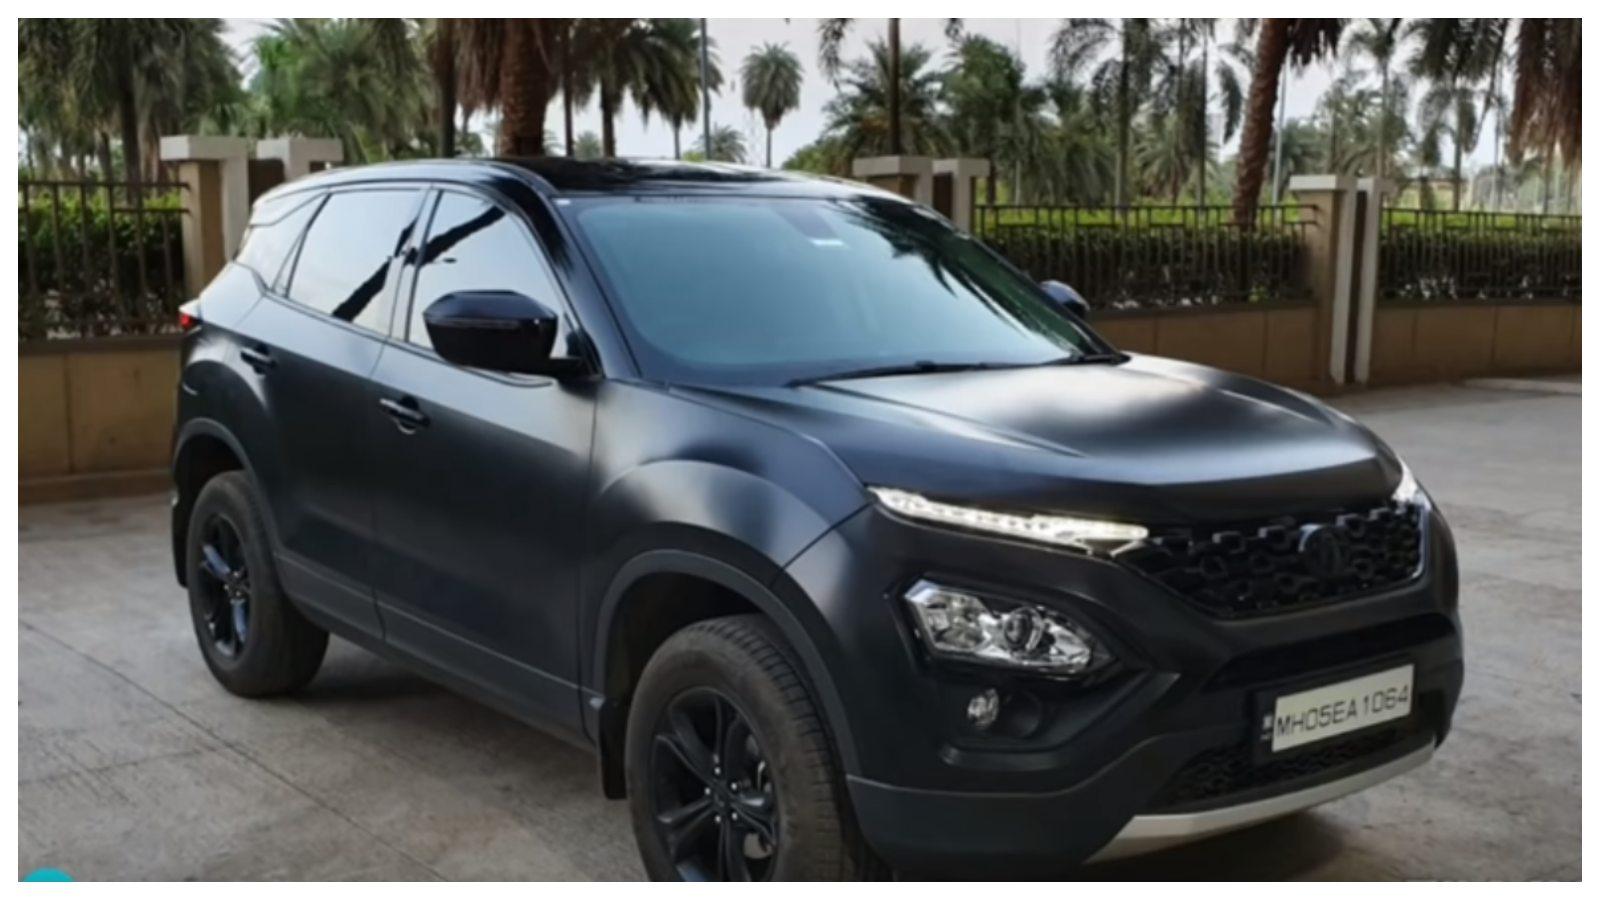 This Wrapped Tata Harrier Is Aptly Named Black Mamba